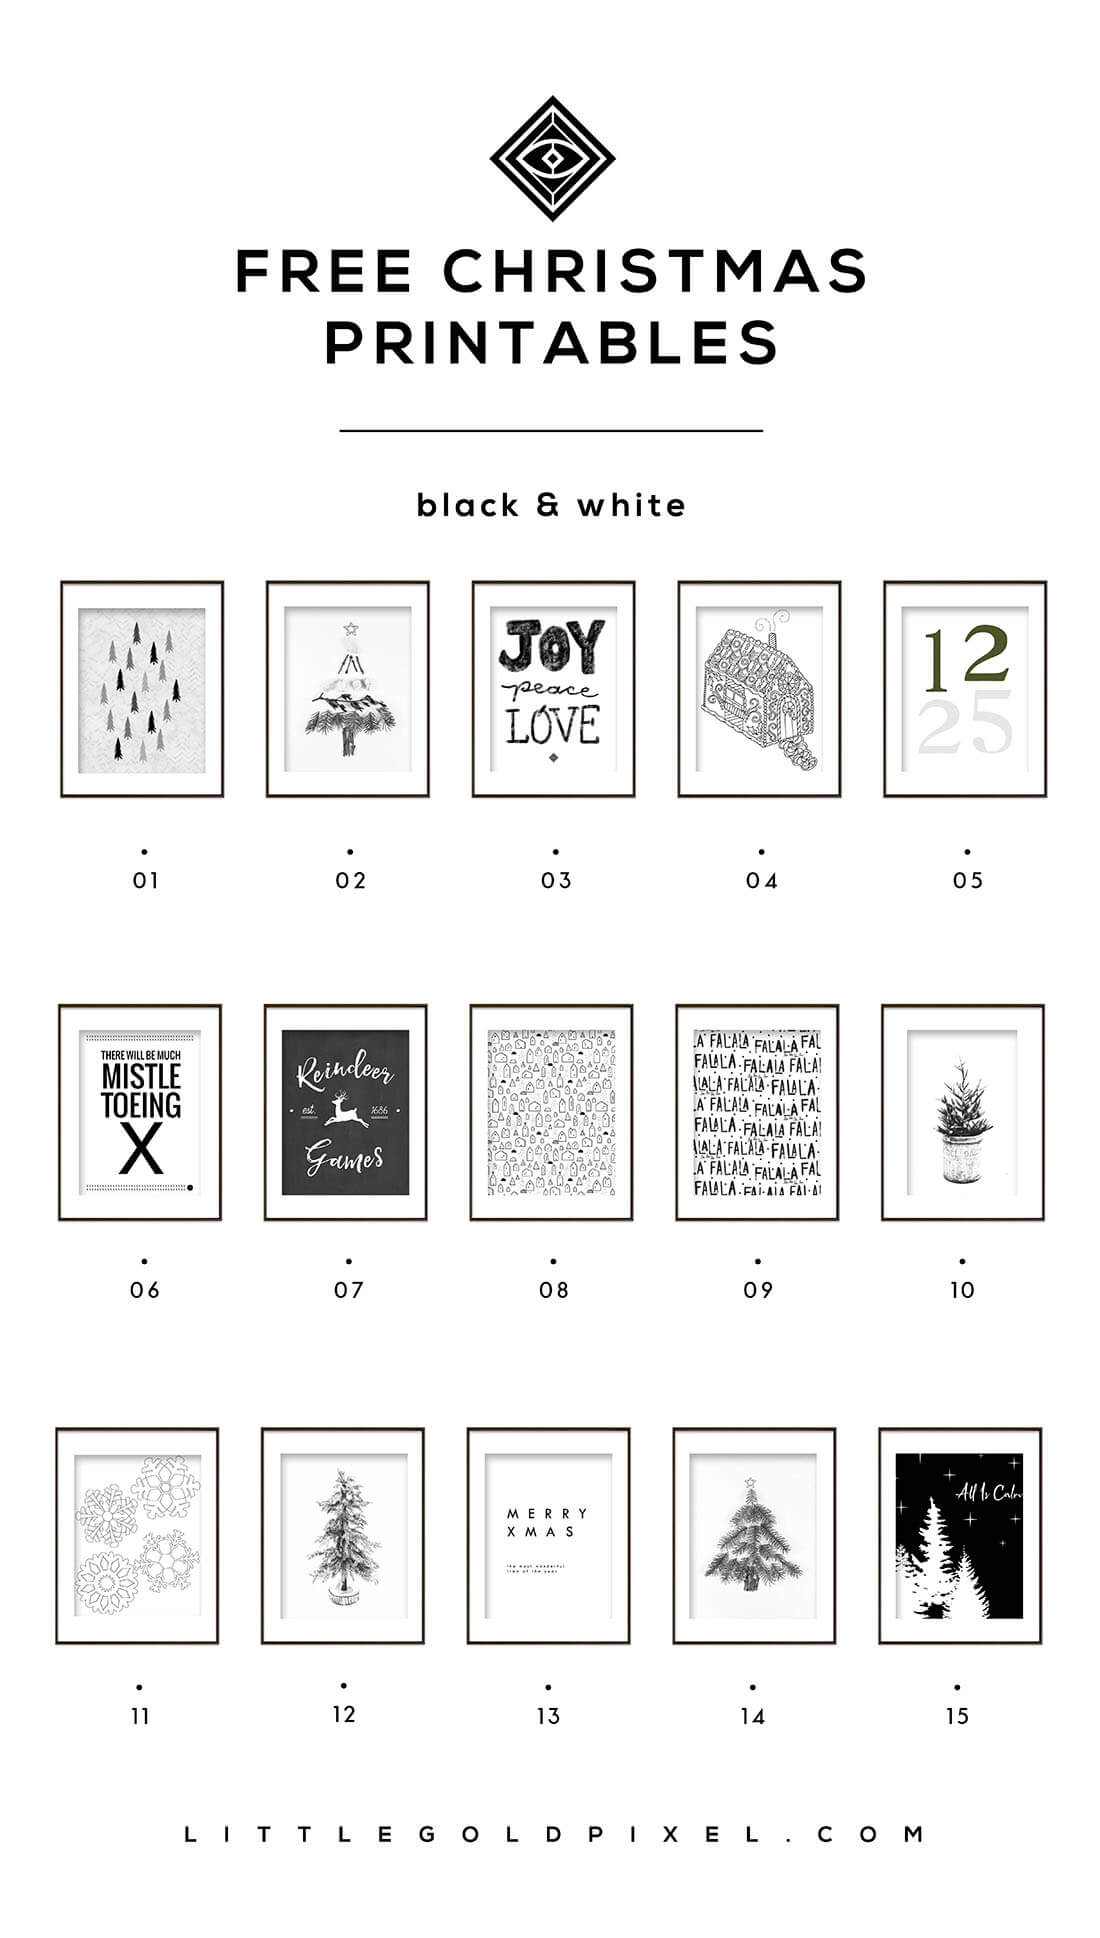 15 Free Christmas Printables • B&W Holiday Roundup • Little Gold Pixel • In which I round up 15 free Christmas printables from my fave bloggers for those of us who like B&W holiday decor. Consider this my last-minute gift to you! #freebies #freeprintables #freeholidayprintables #freechristmasart